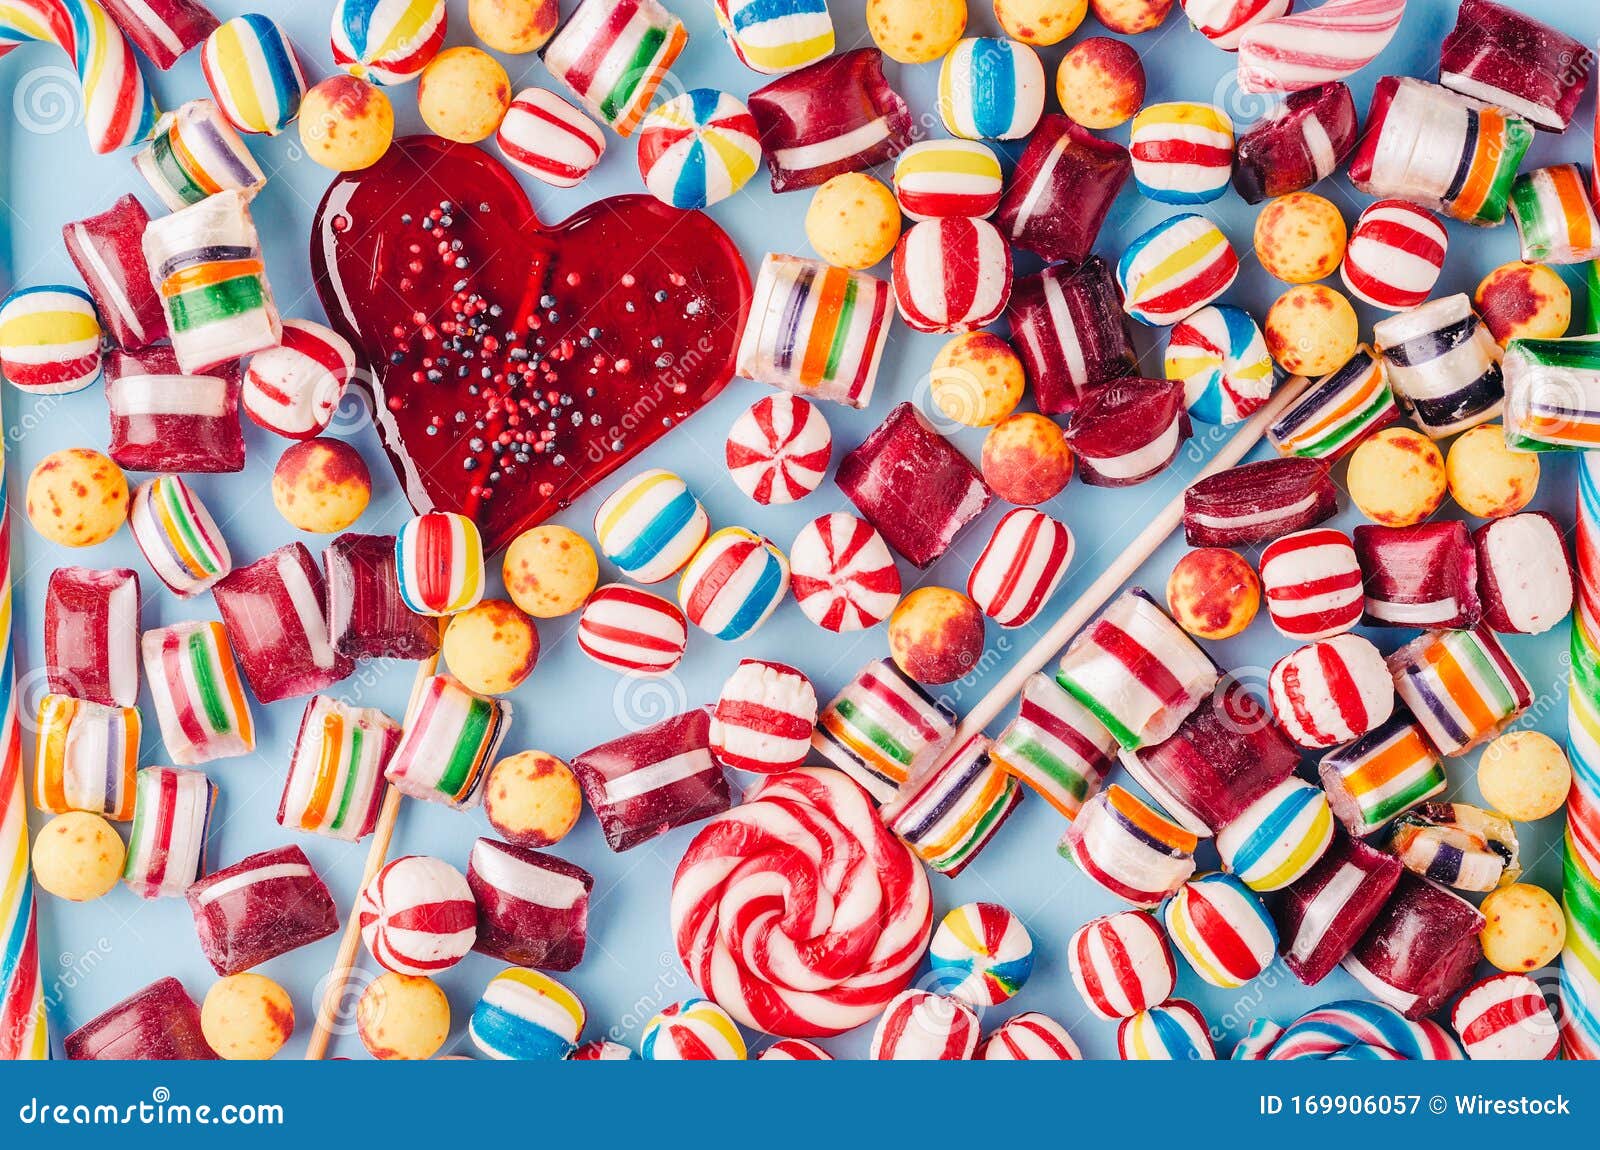 High Angle Shot of Colorful Candies and a Heart-shaped Lollipop - Perfect  for a Cool Wallpaper Stock Image - Image of delicious, beautiful: 169906057